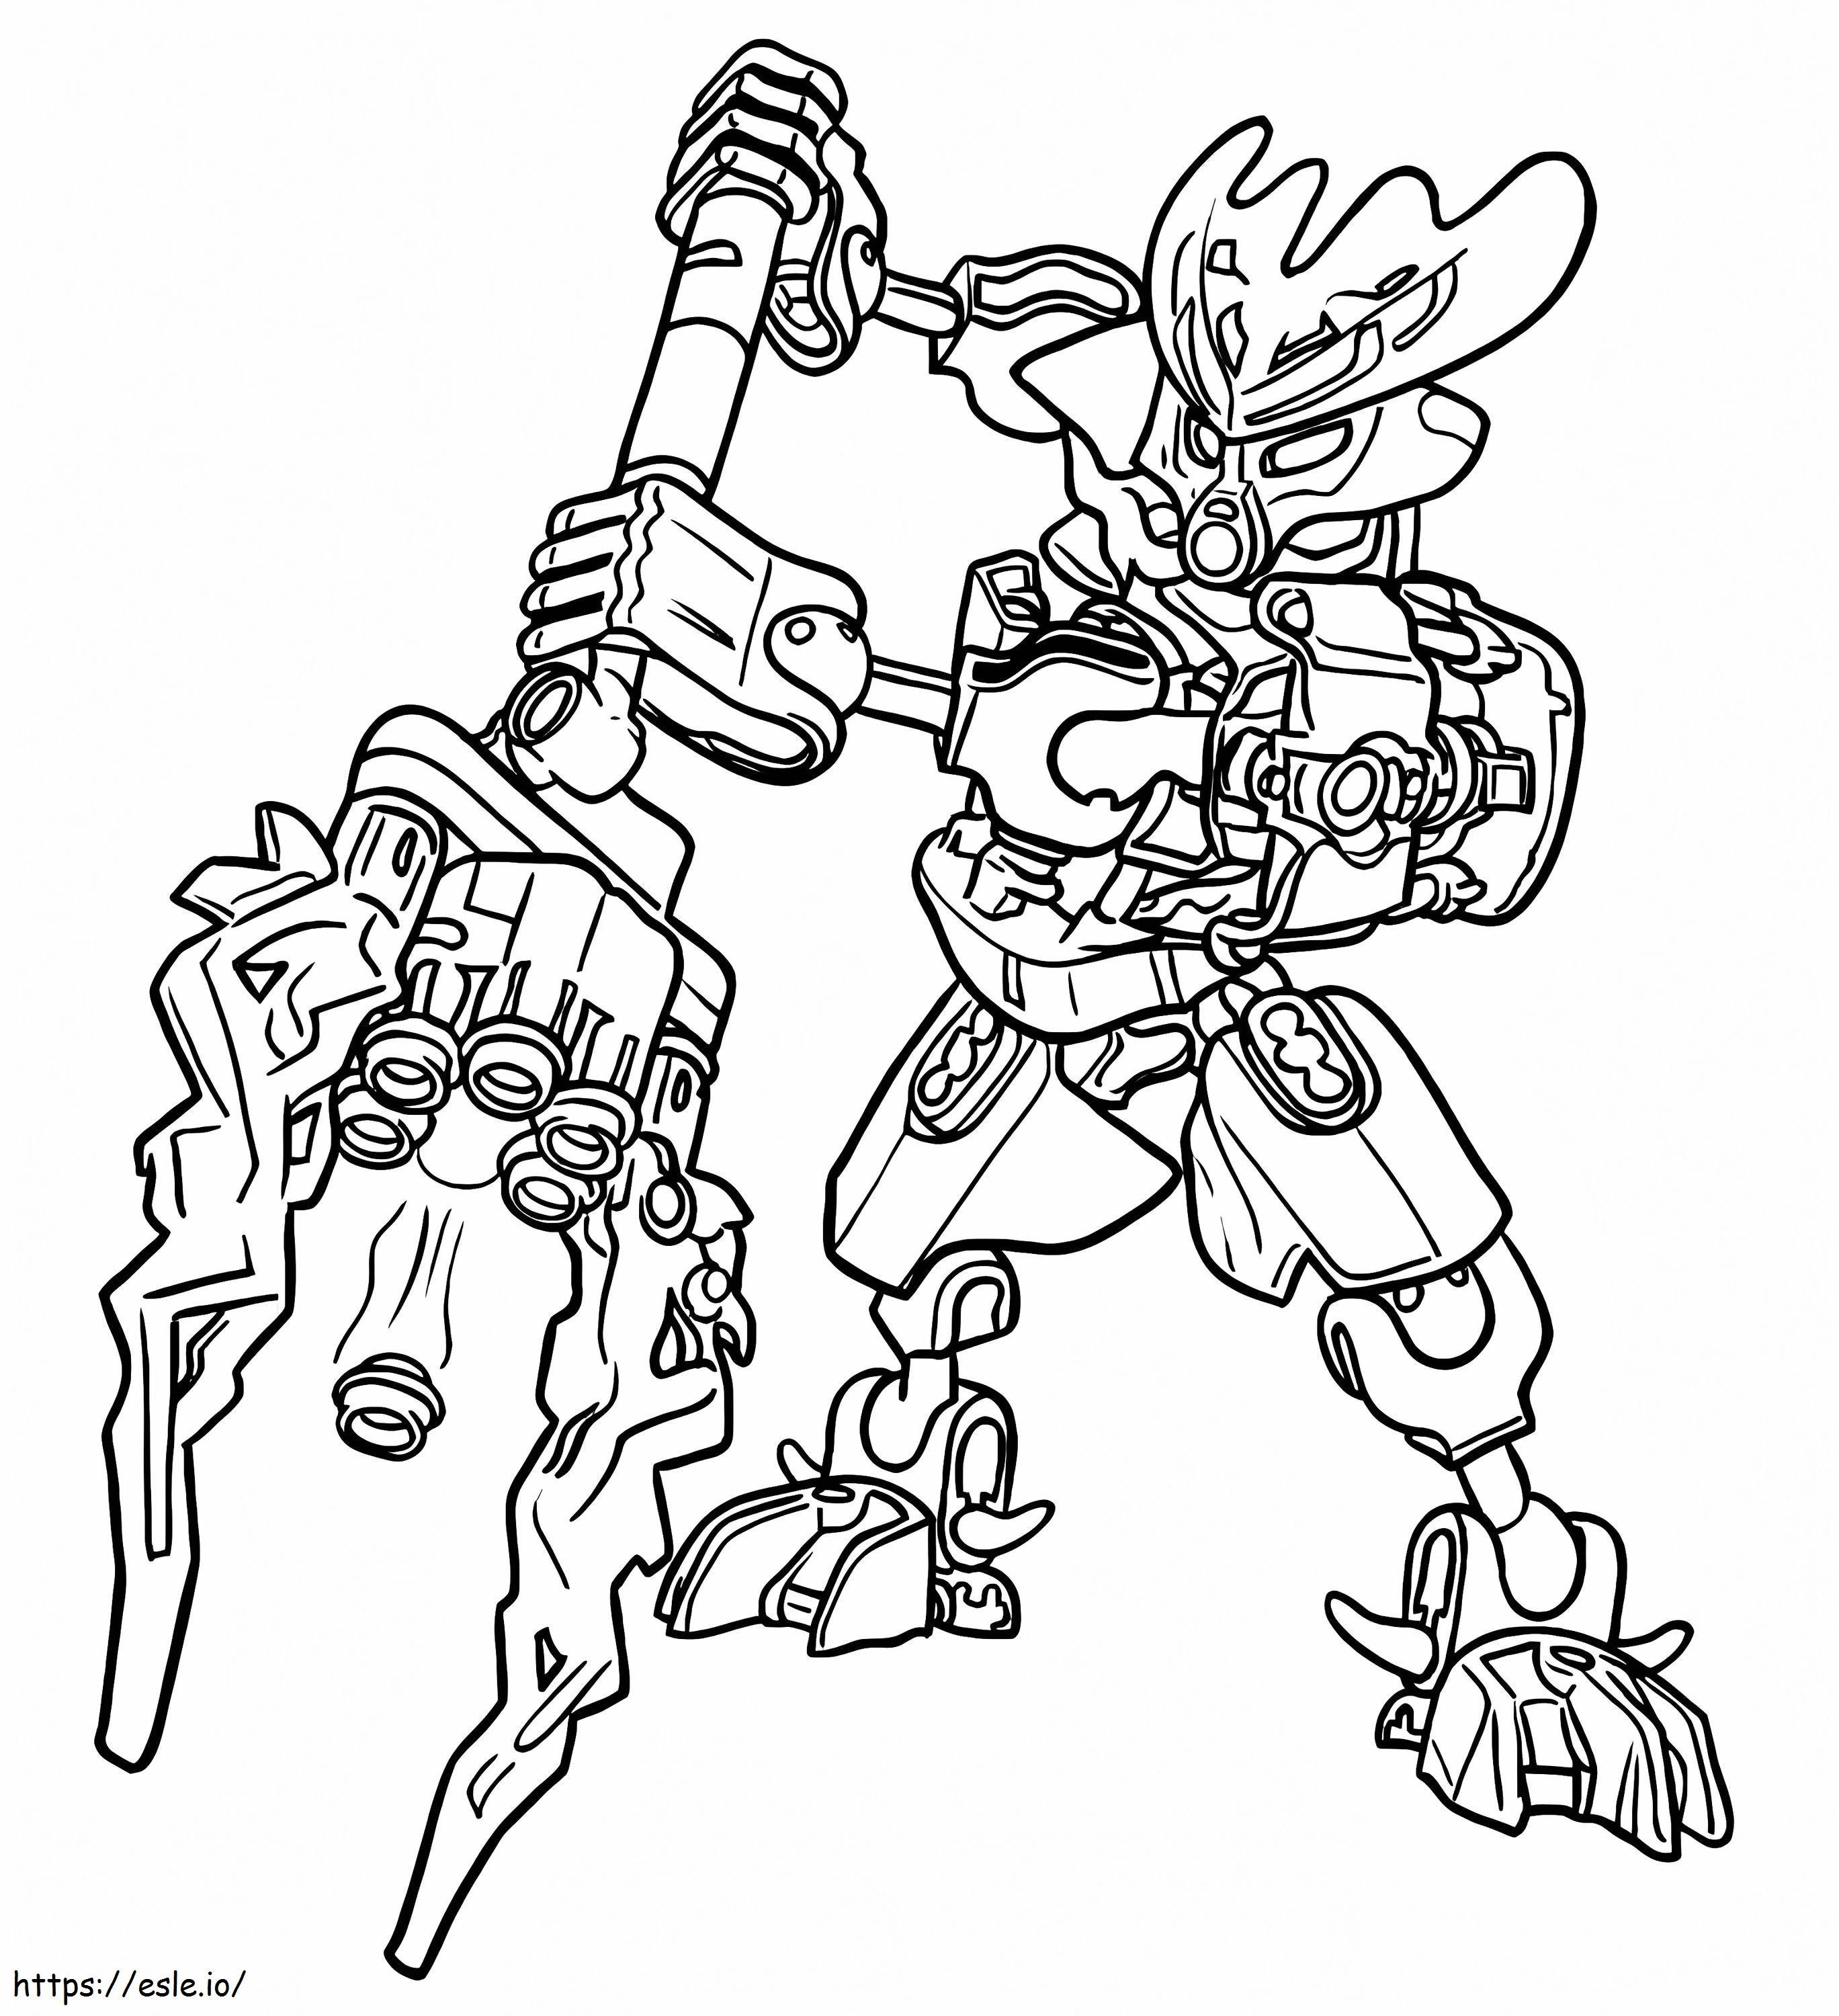 Protector Of Stone Bionicle coloring page